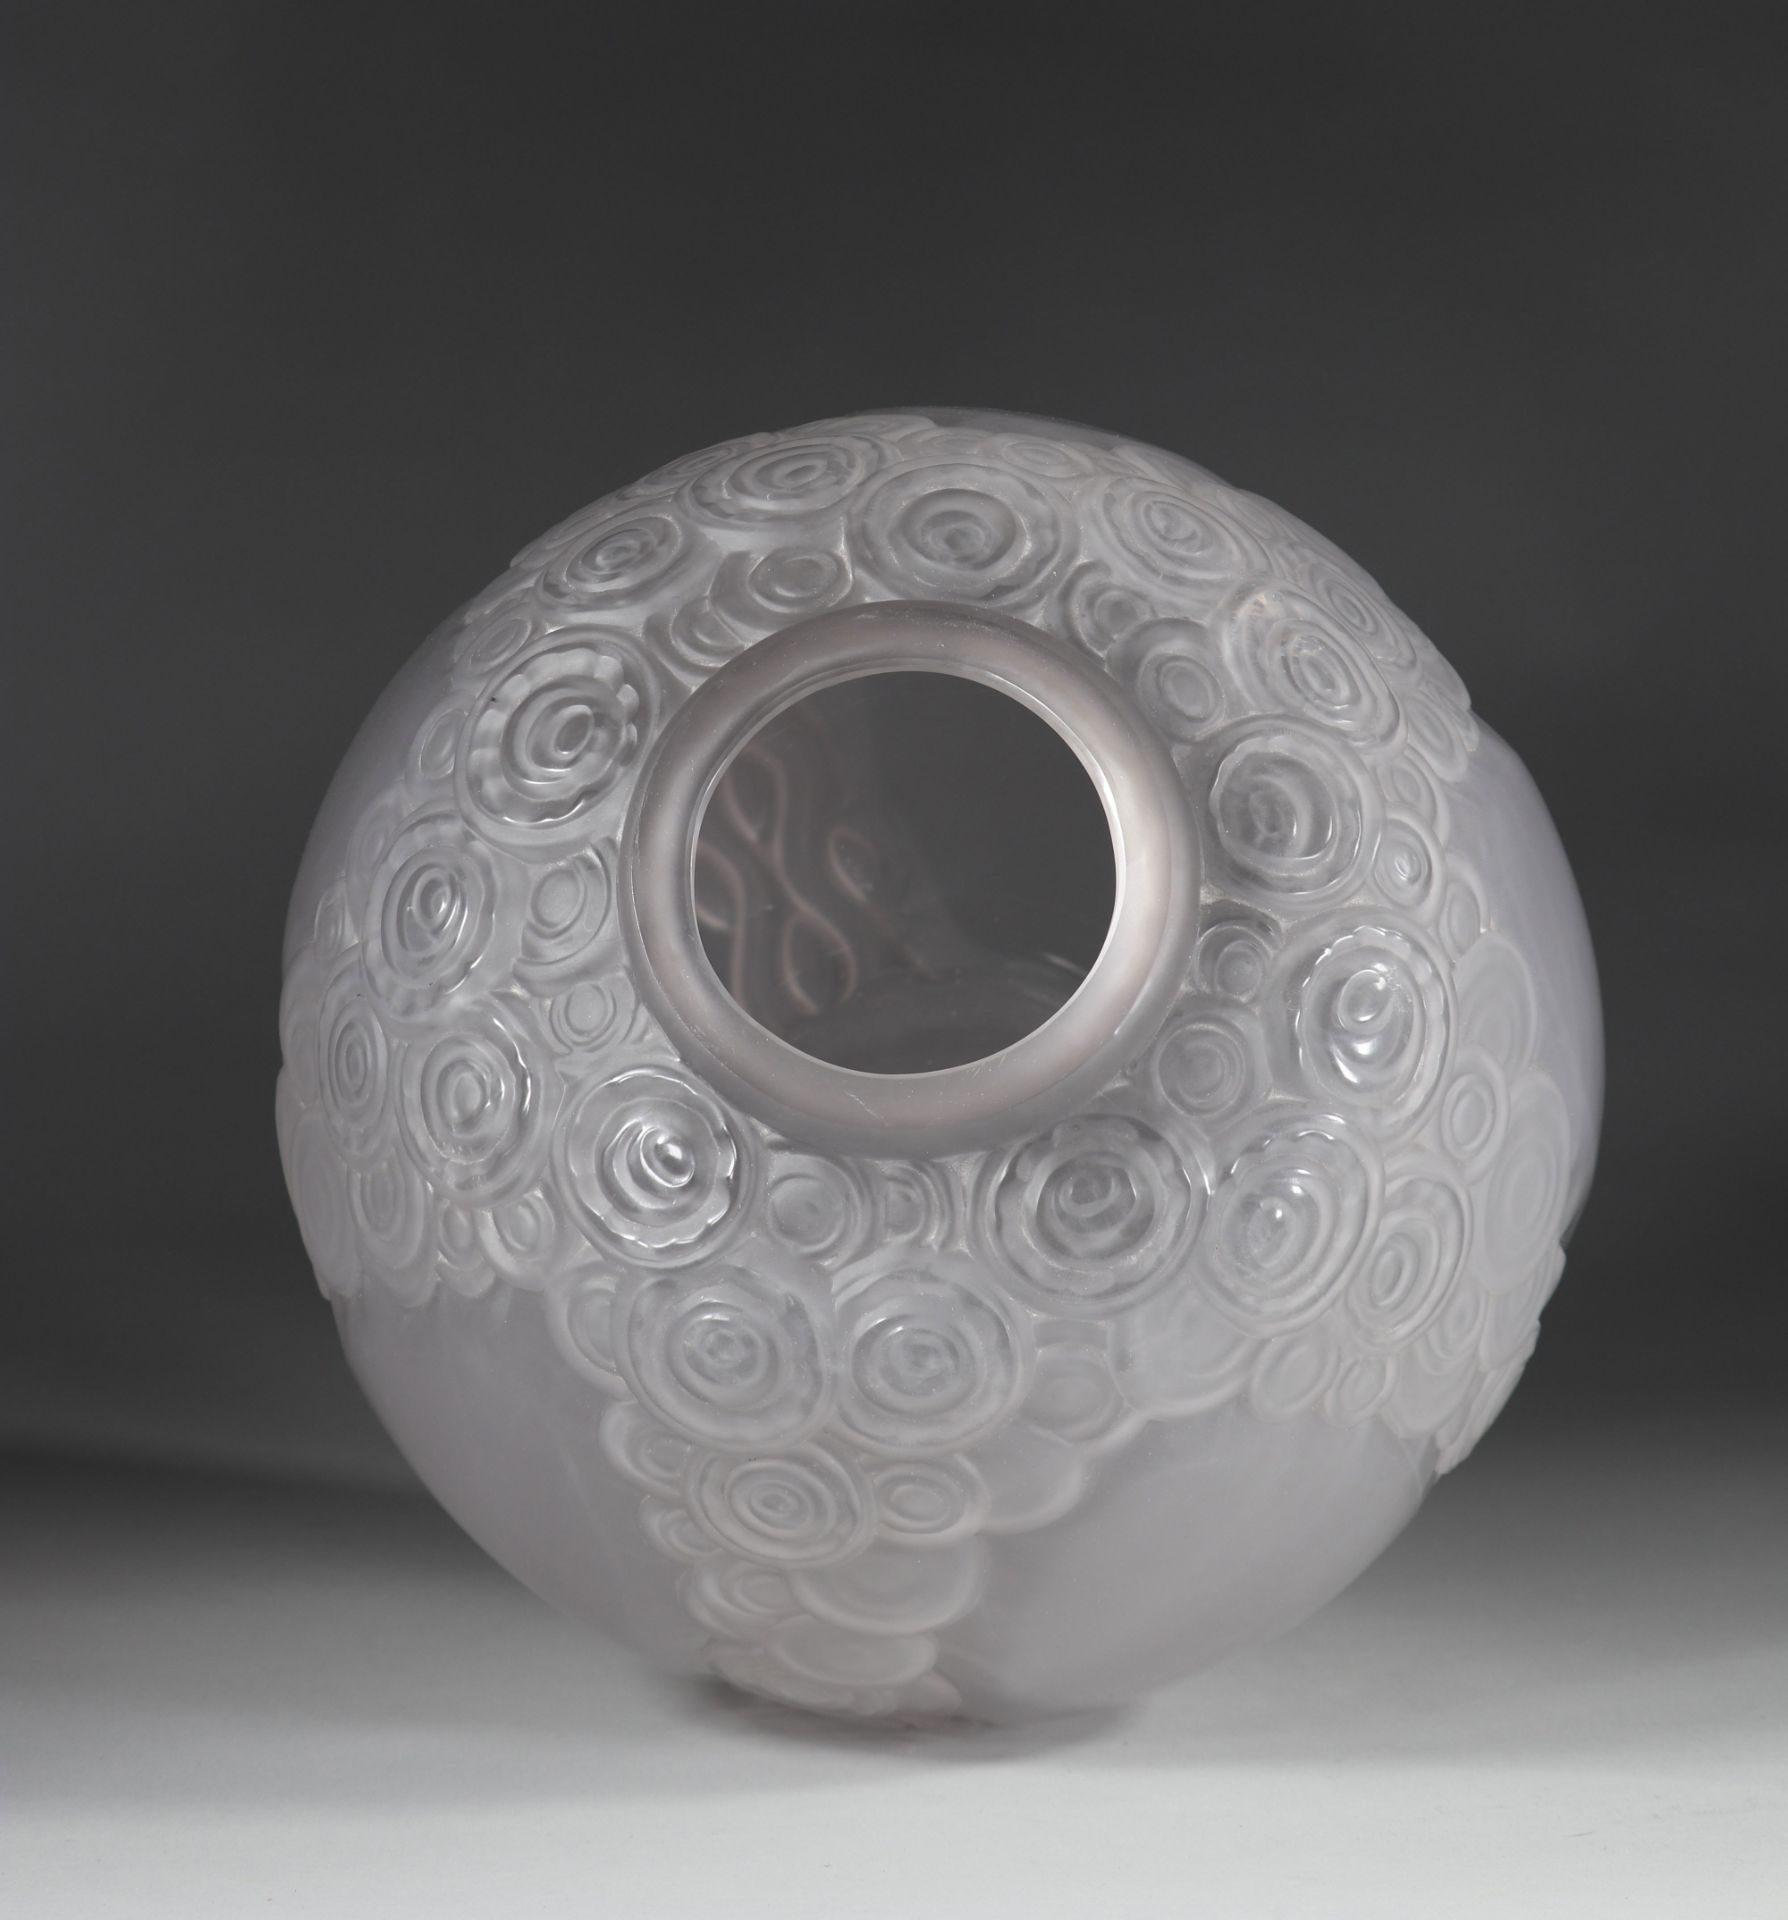 Andre HUNEBELLE imposing ovoid glass vase with a garland of falling stylized flowers - Image 4 of 6